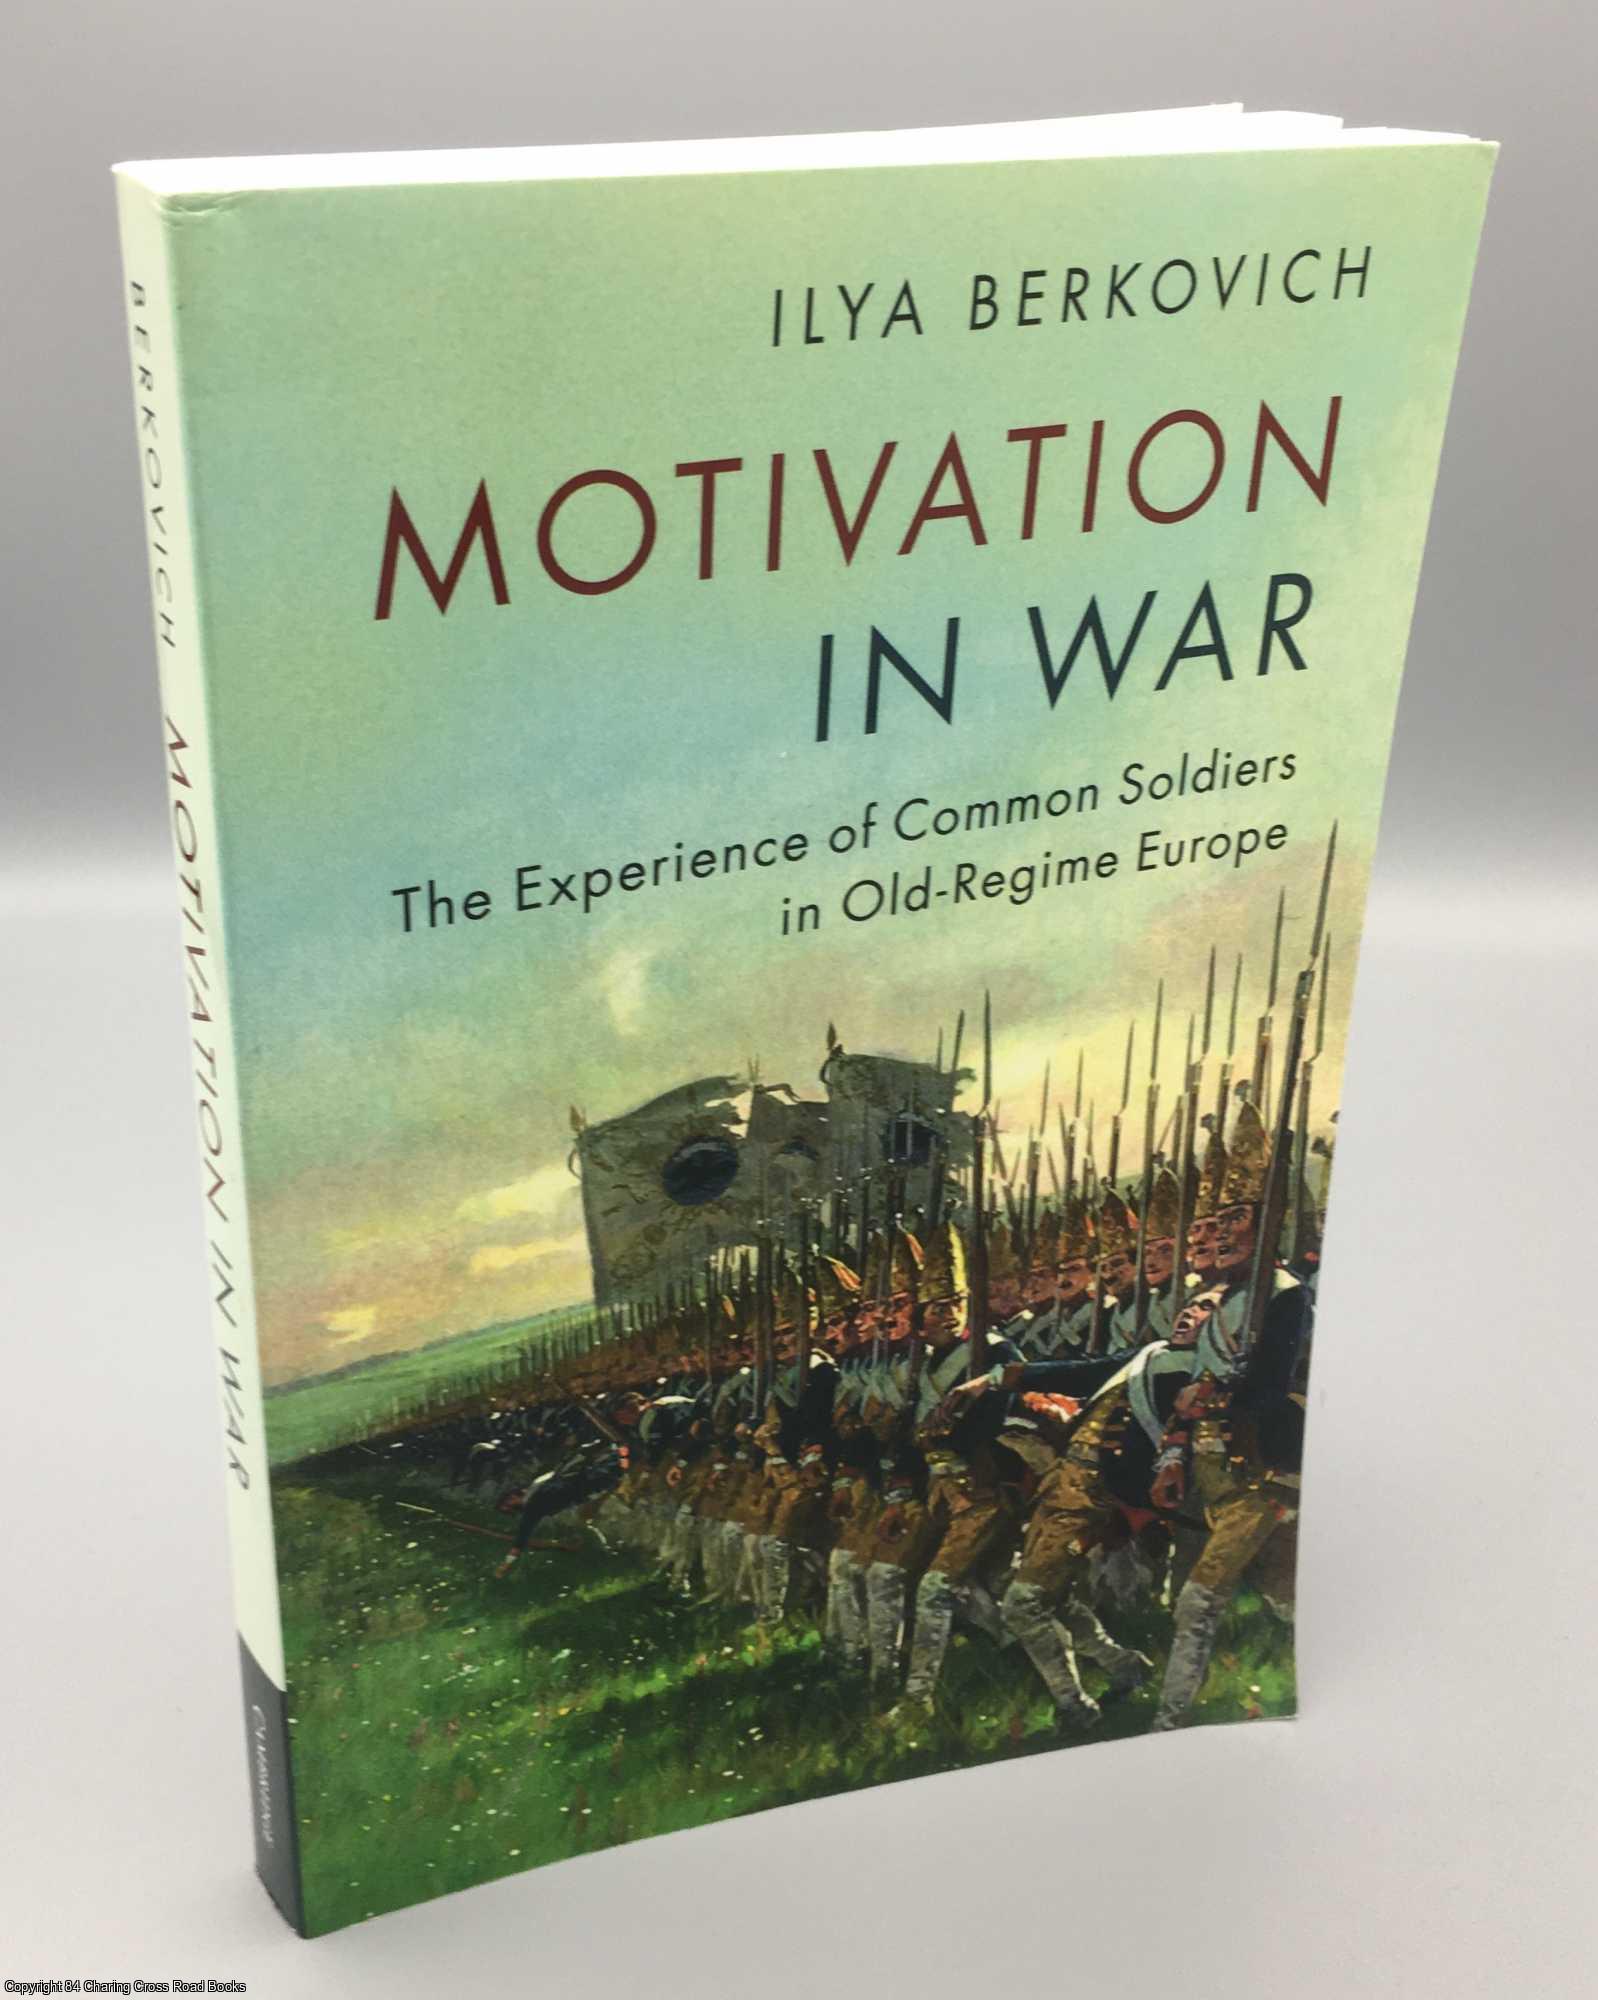 Berkovich, Ilya - Motivation in War: The Experience of Common Soldiers in Old-Regime Europe